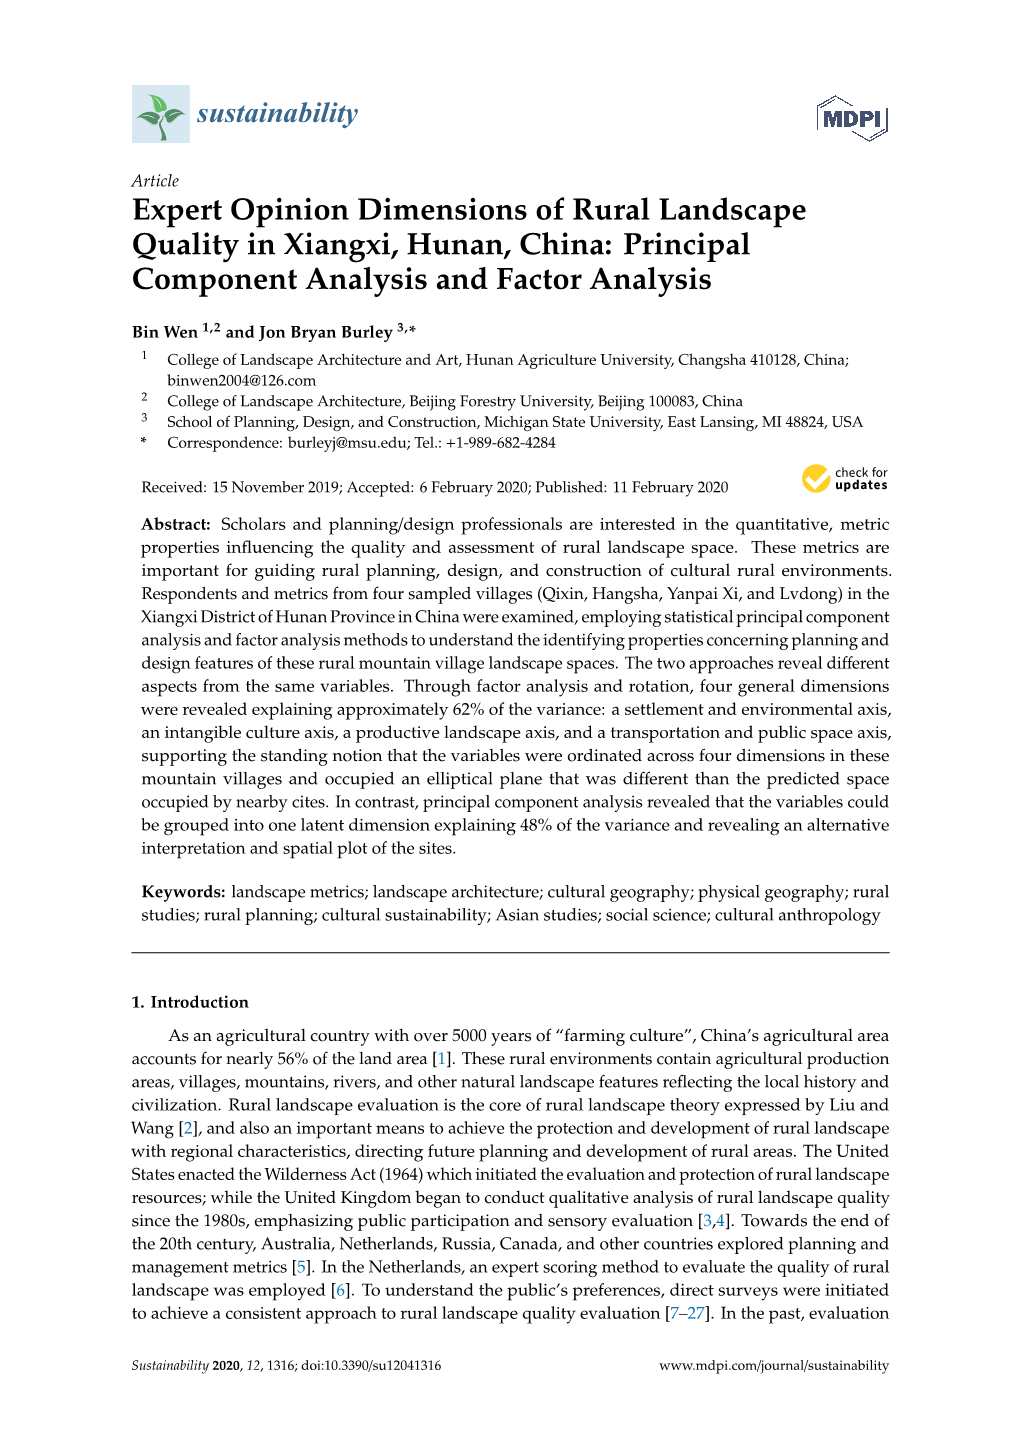 Expert Opinion Dimensions of Rural Landscape Quality in Xiangxi, Hunan, China: Principal Component Analysis and Factor Analysis